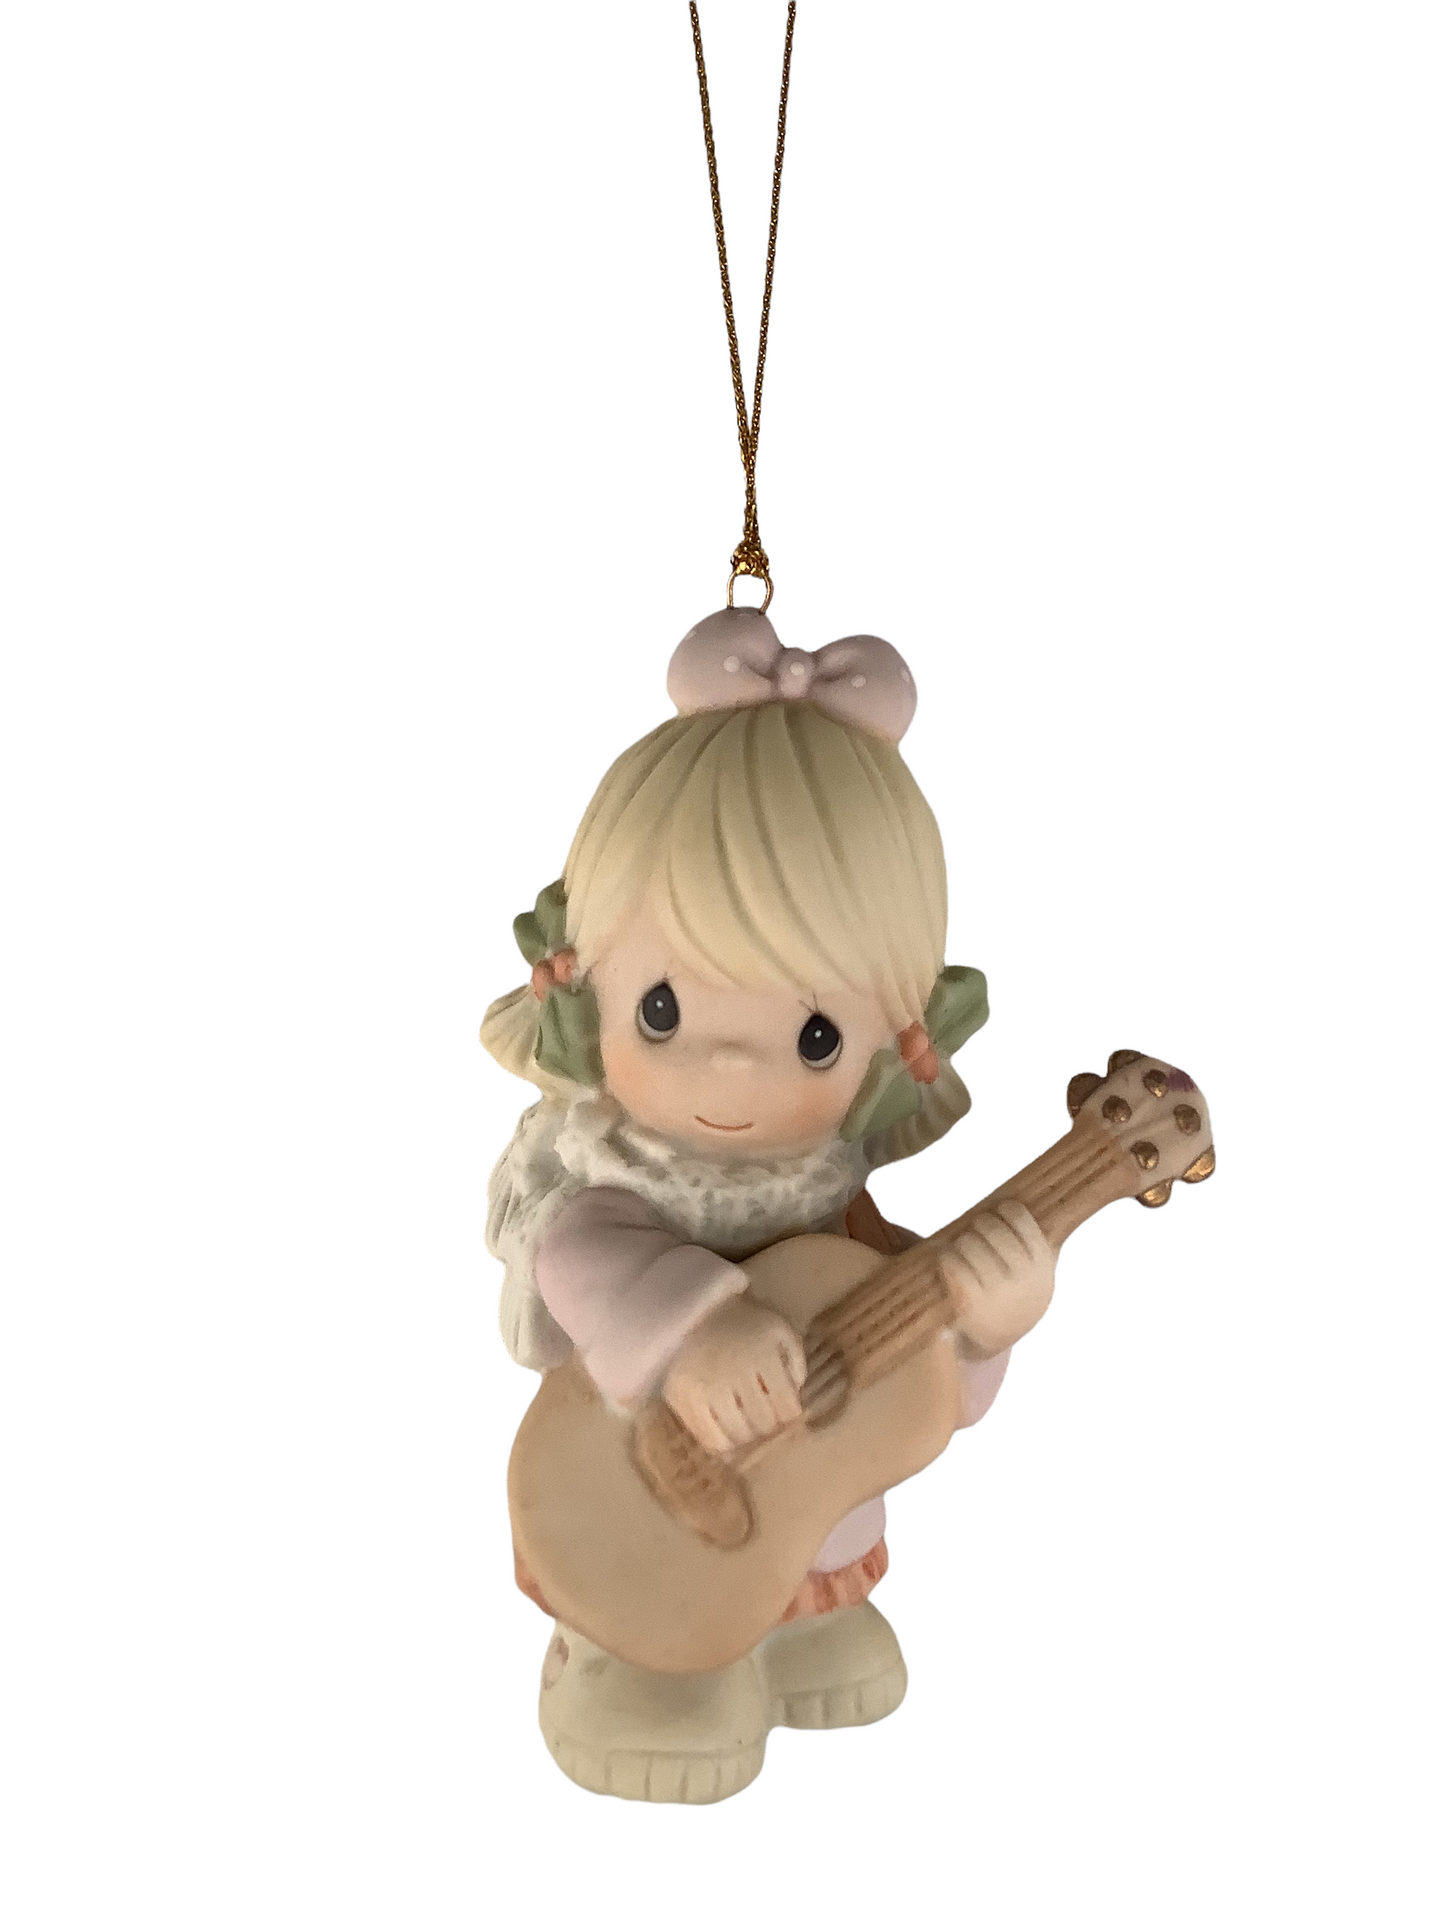 Sing A New Song - Precious Moment Ornament